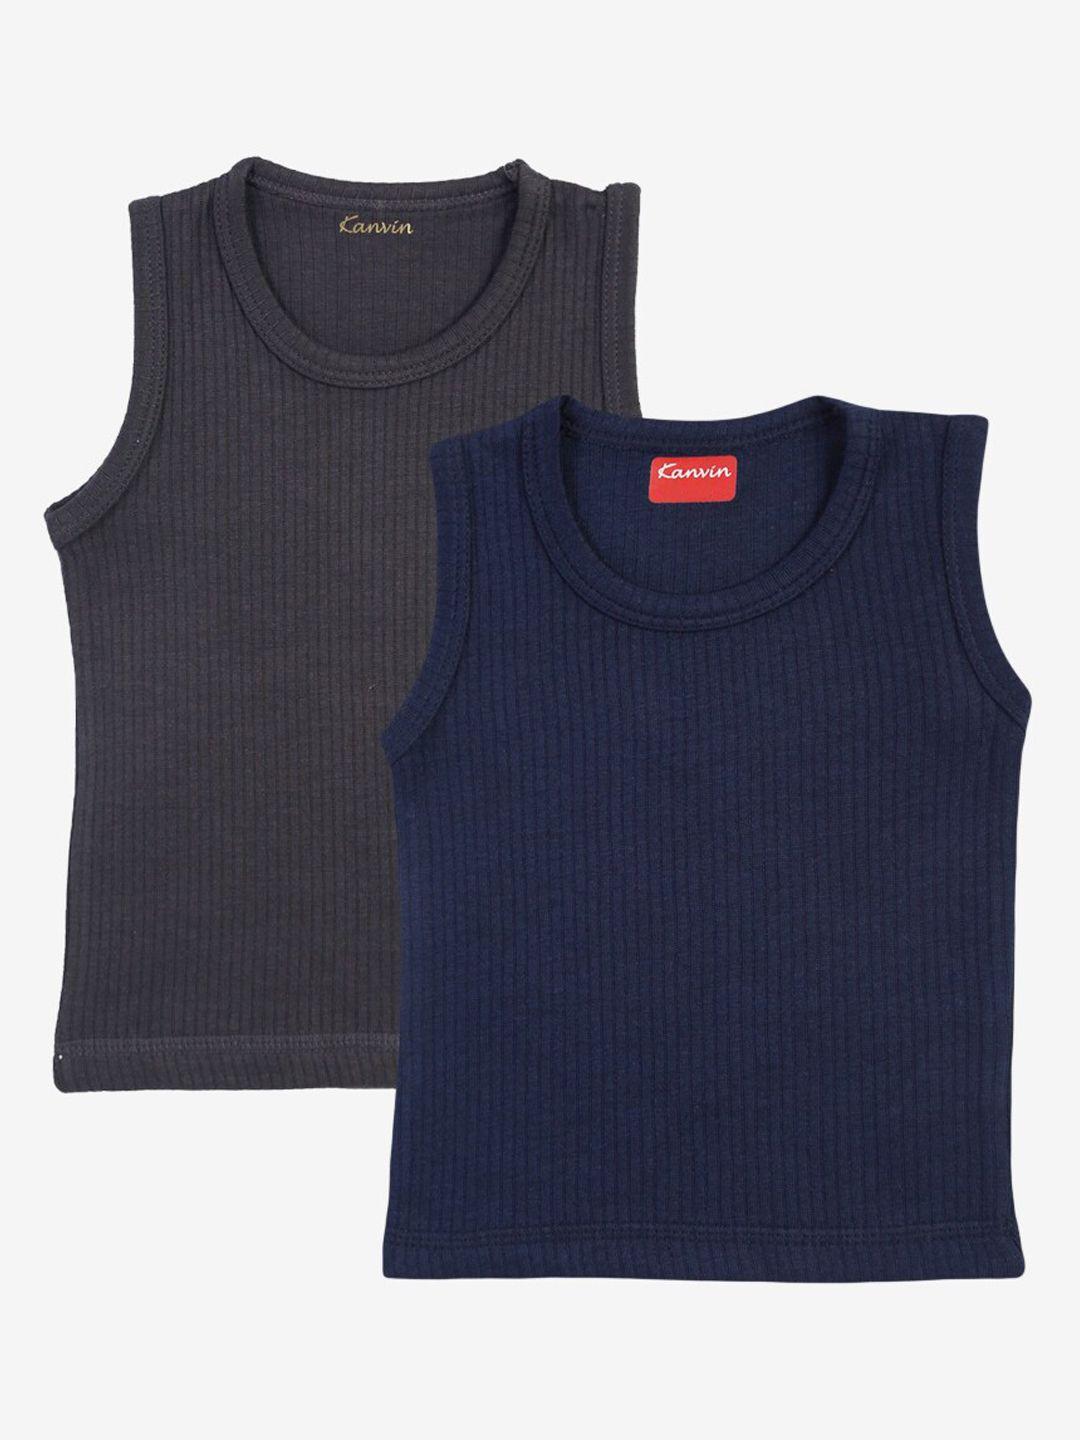 kanvin boys charcoal and blue pack of 2 solid thermal tops